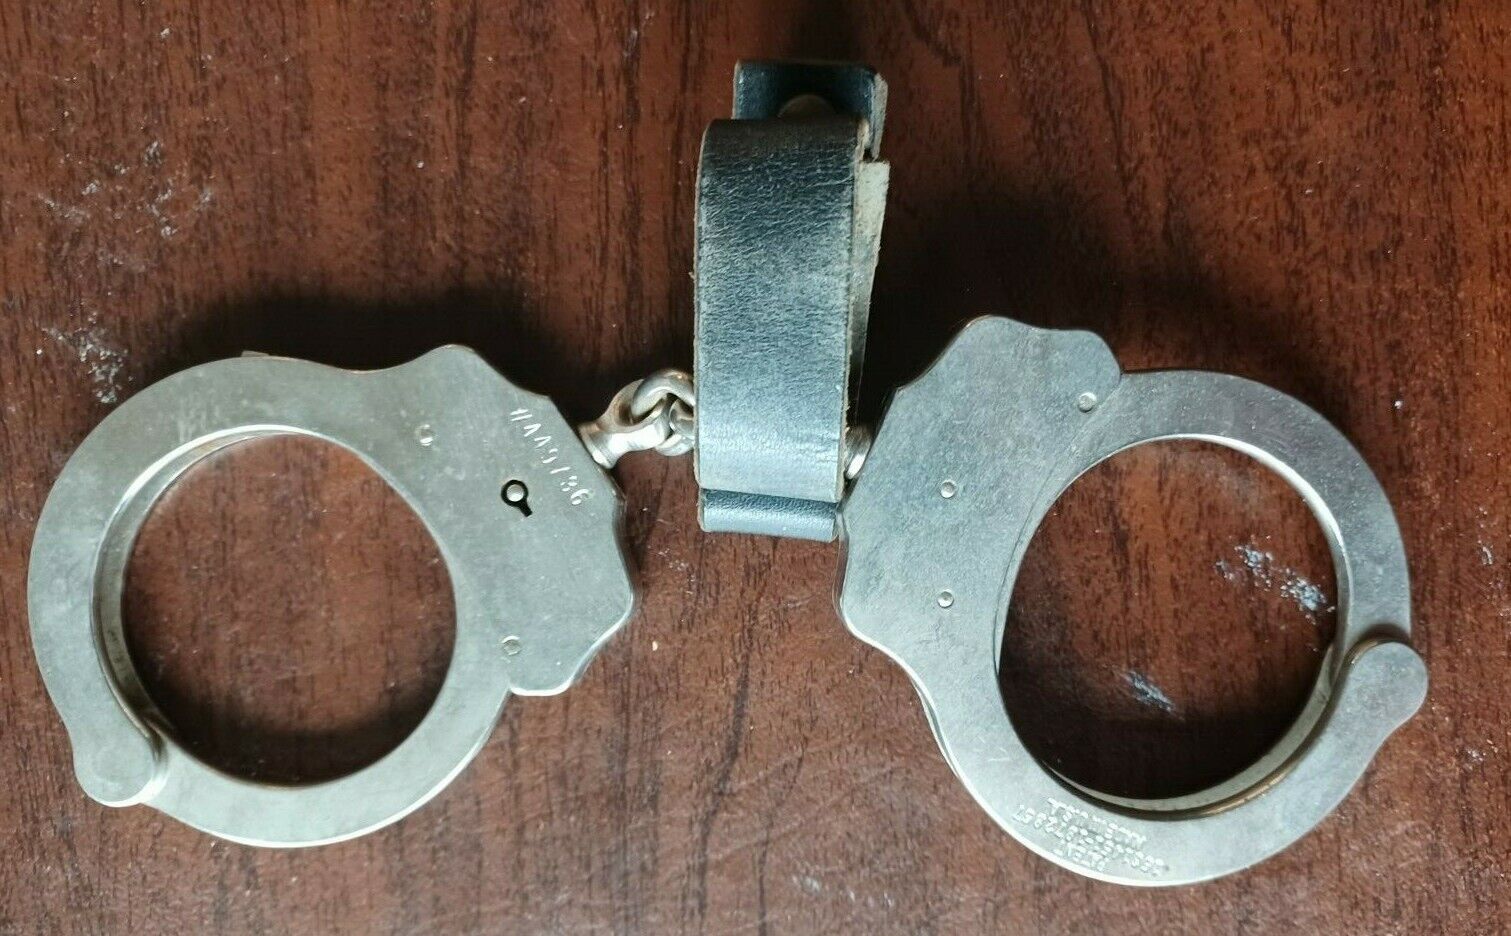 Peerless Model 300 Handcuffs With Holder - Keys Not Included